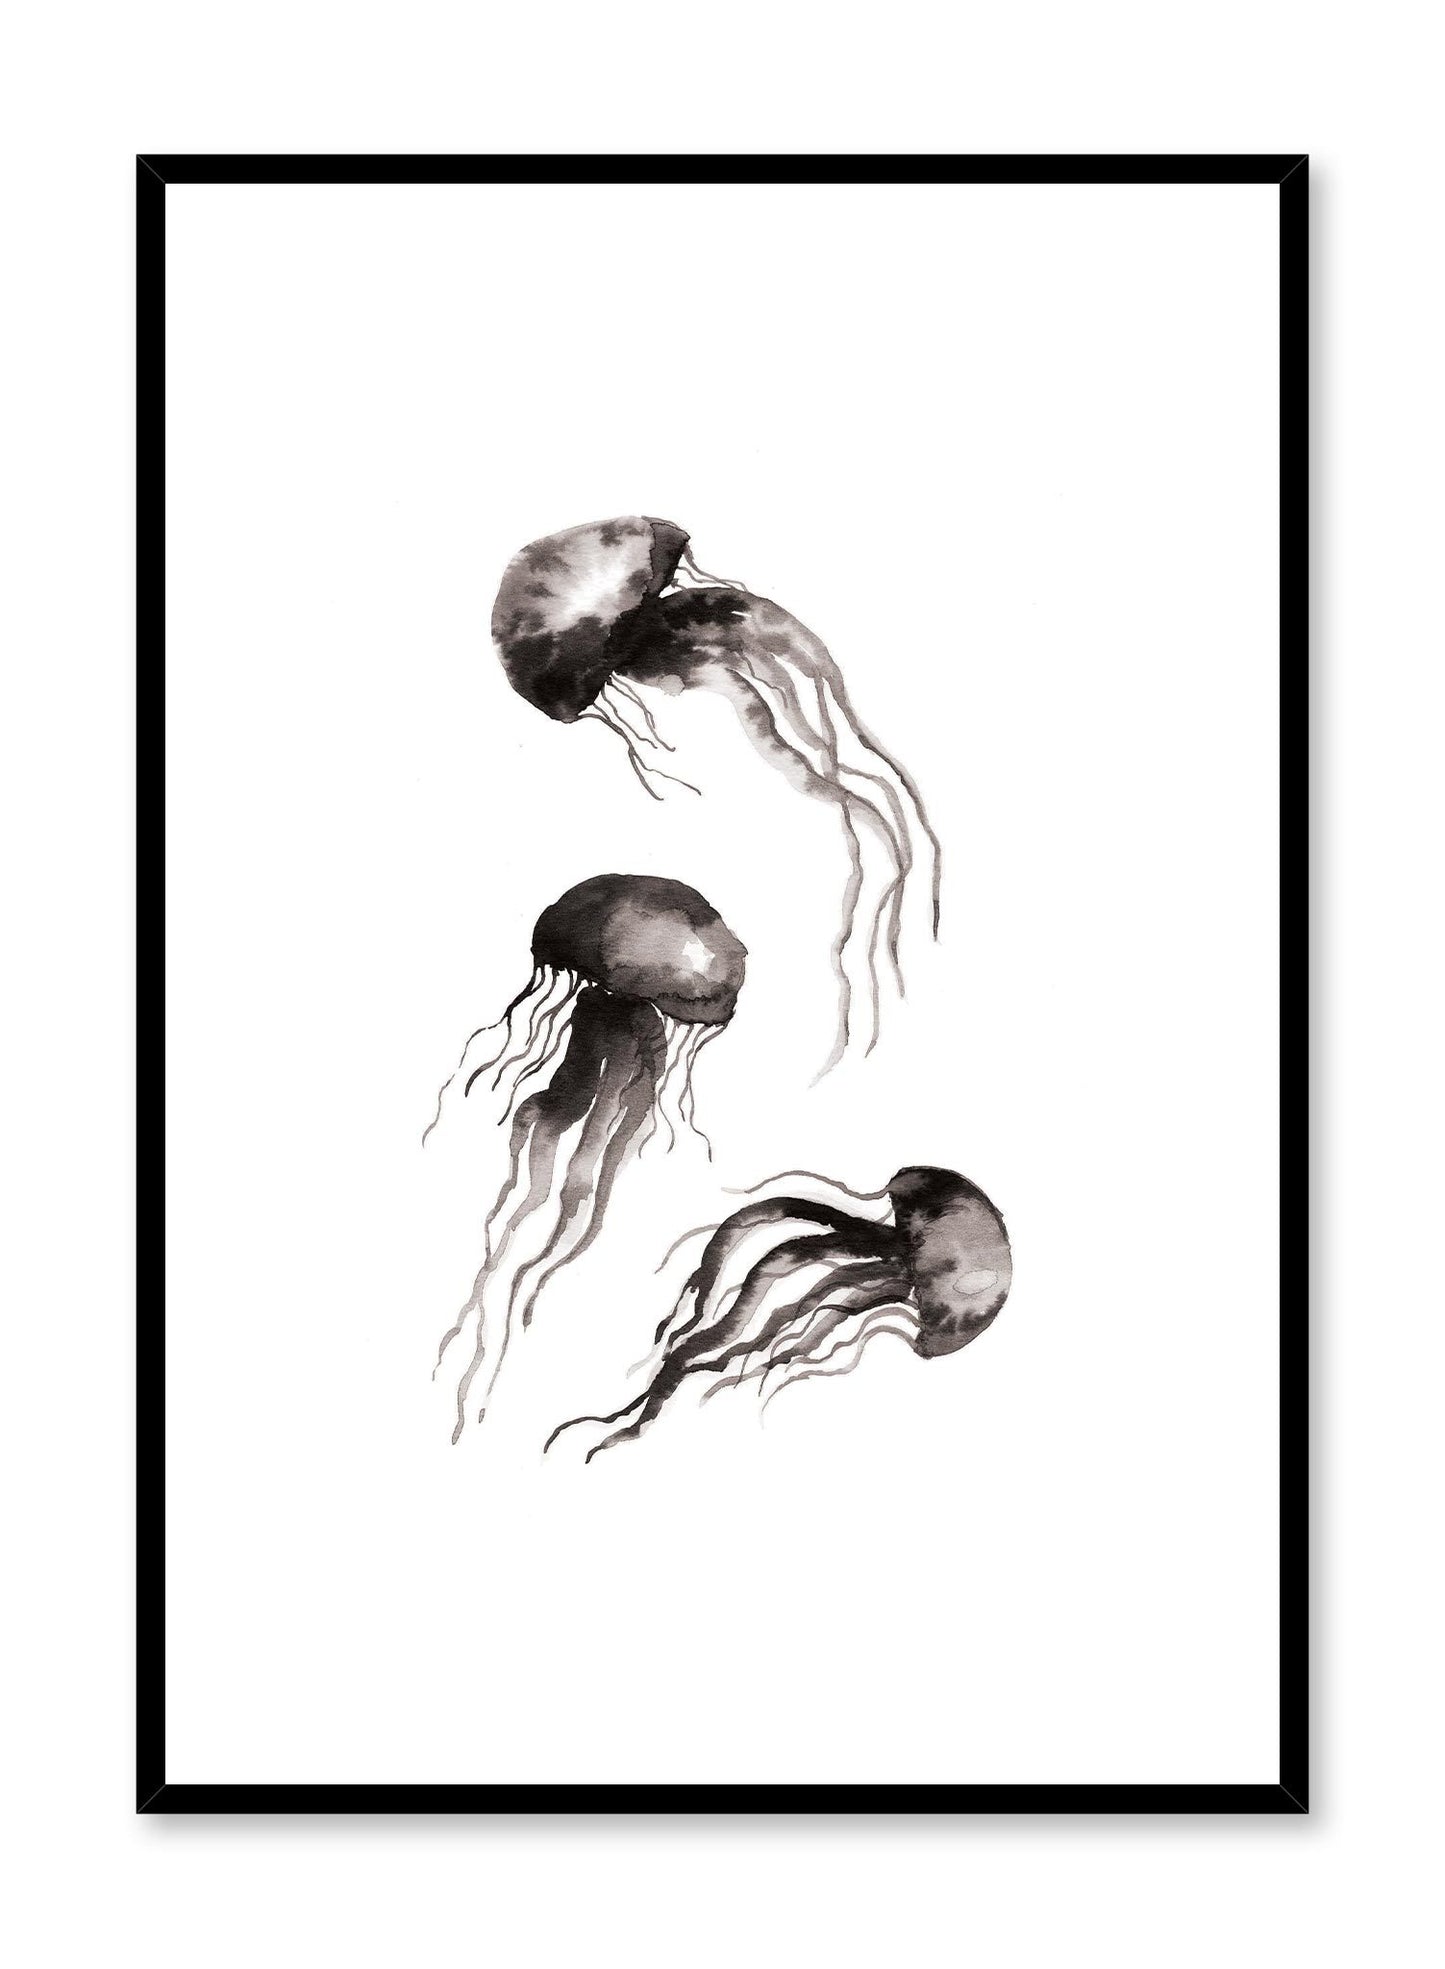 Medusa is a minimalist illustration by Opposite Wall of three gray jellyfishes drawn in ink.